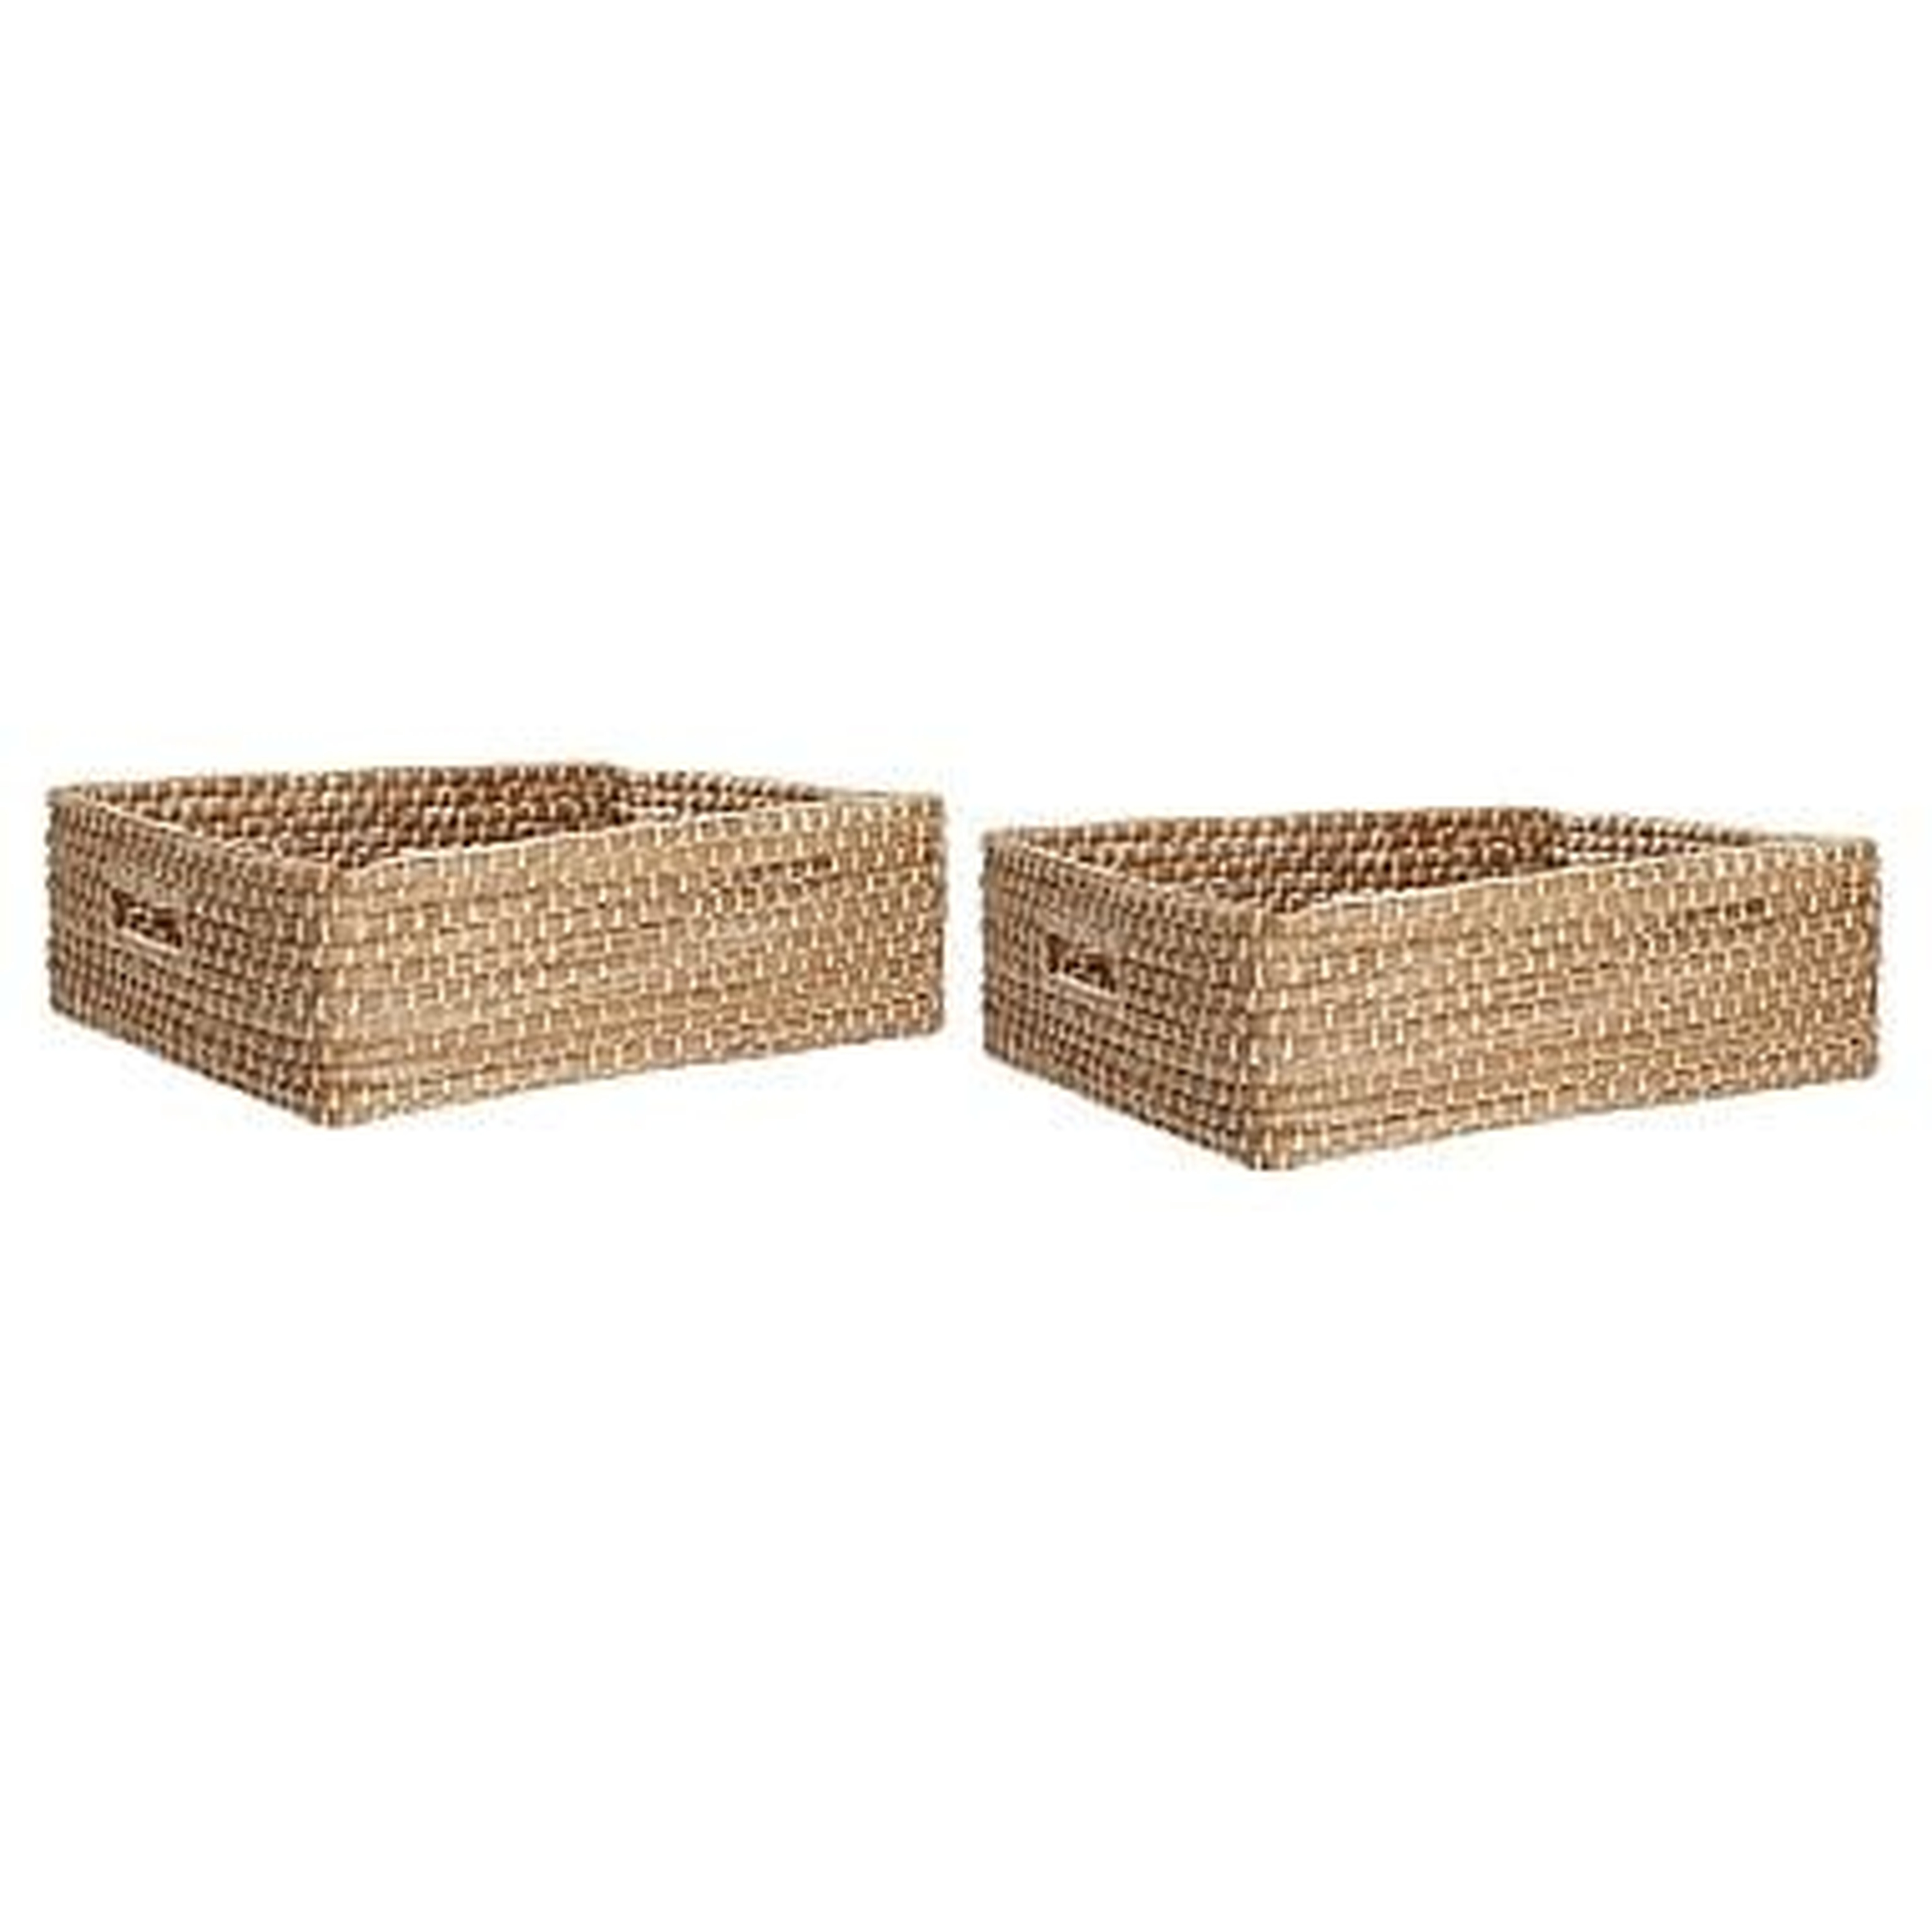 Naturalist Woven Storage Bins, Underbed, Set Of 2, Natural Woven - Pottery Barn Teen